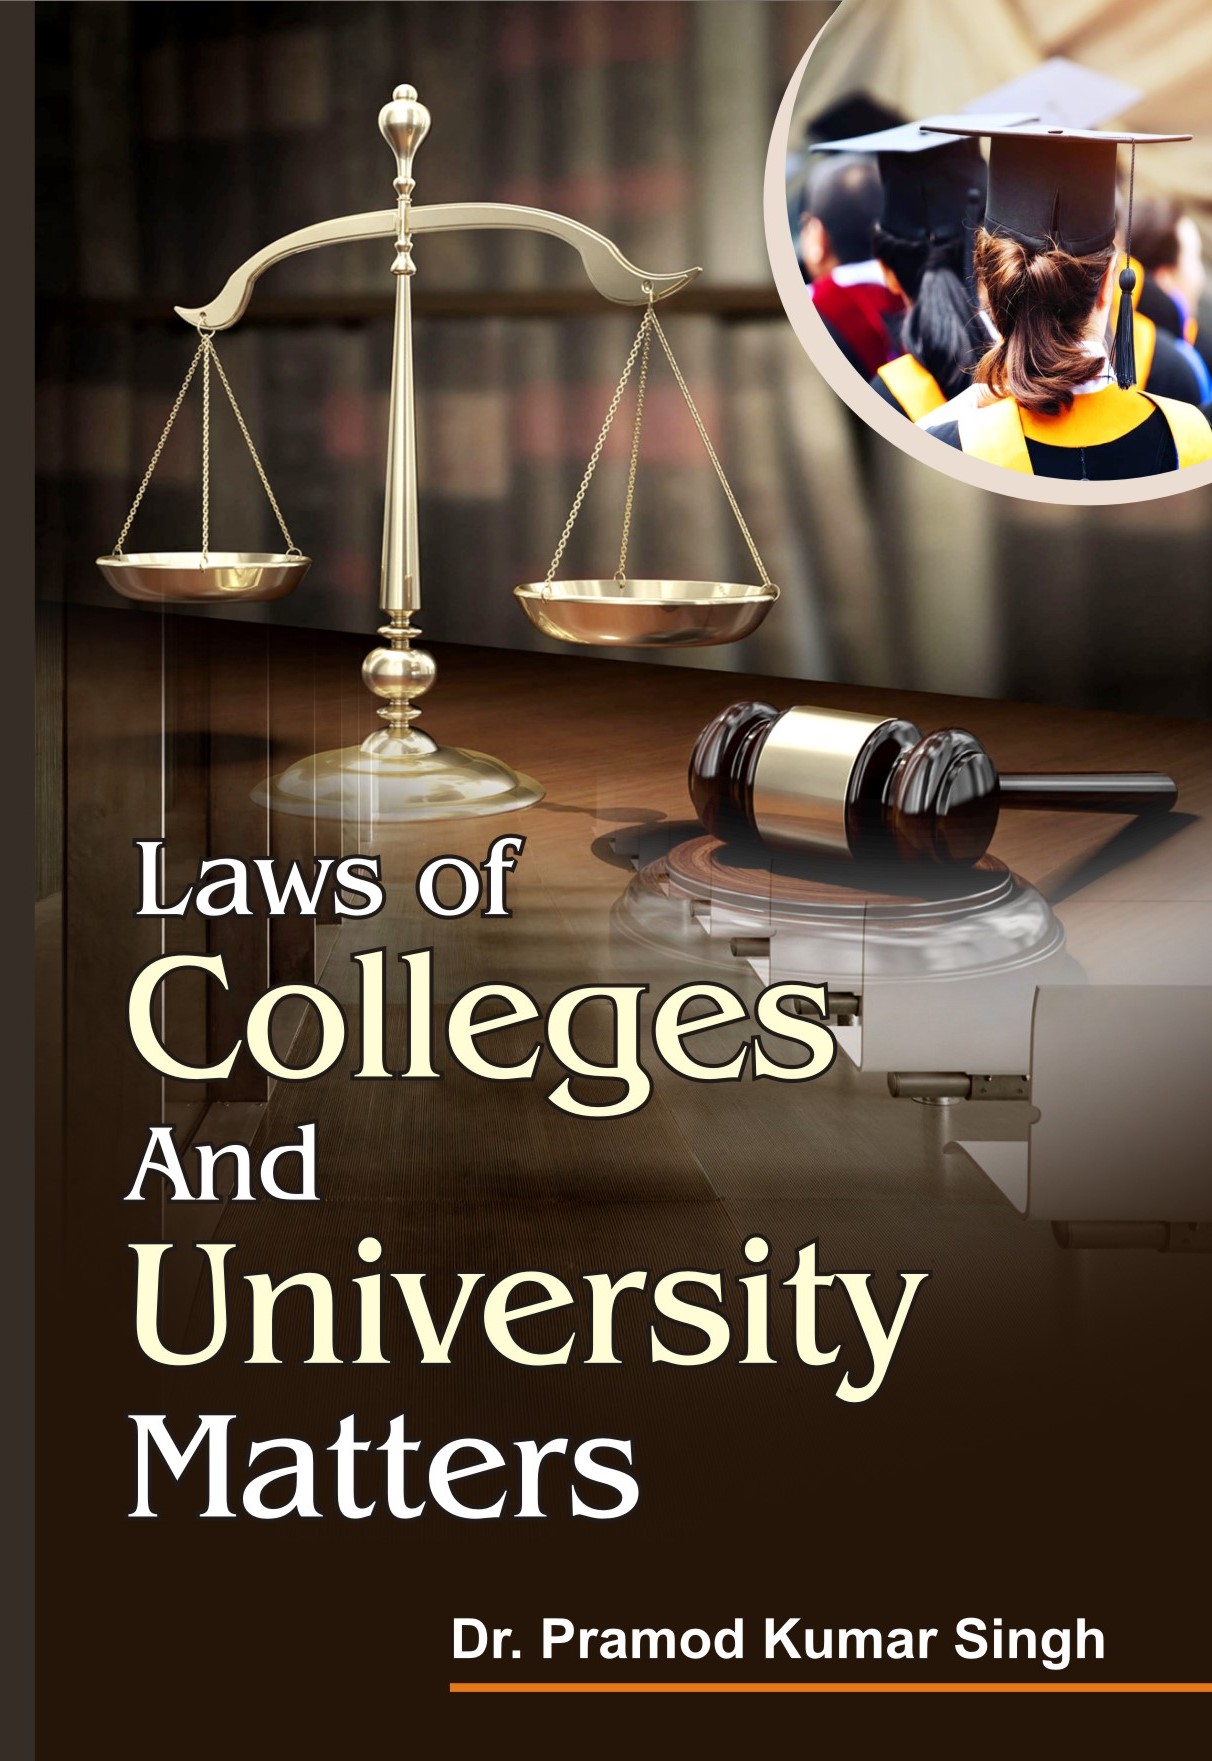 LAWS OF COLLEGES AND UNIVERSITY MATTERS